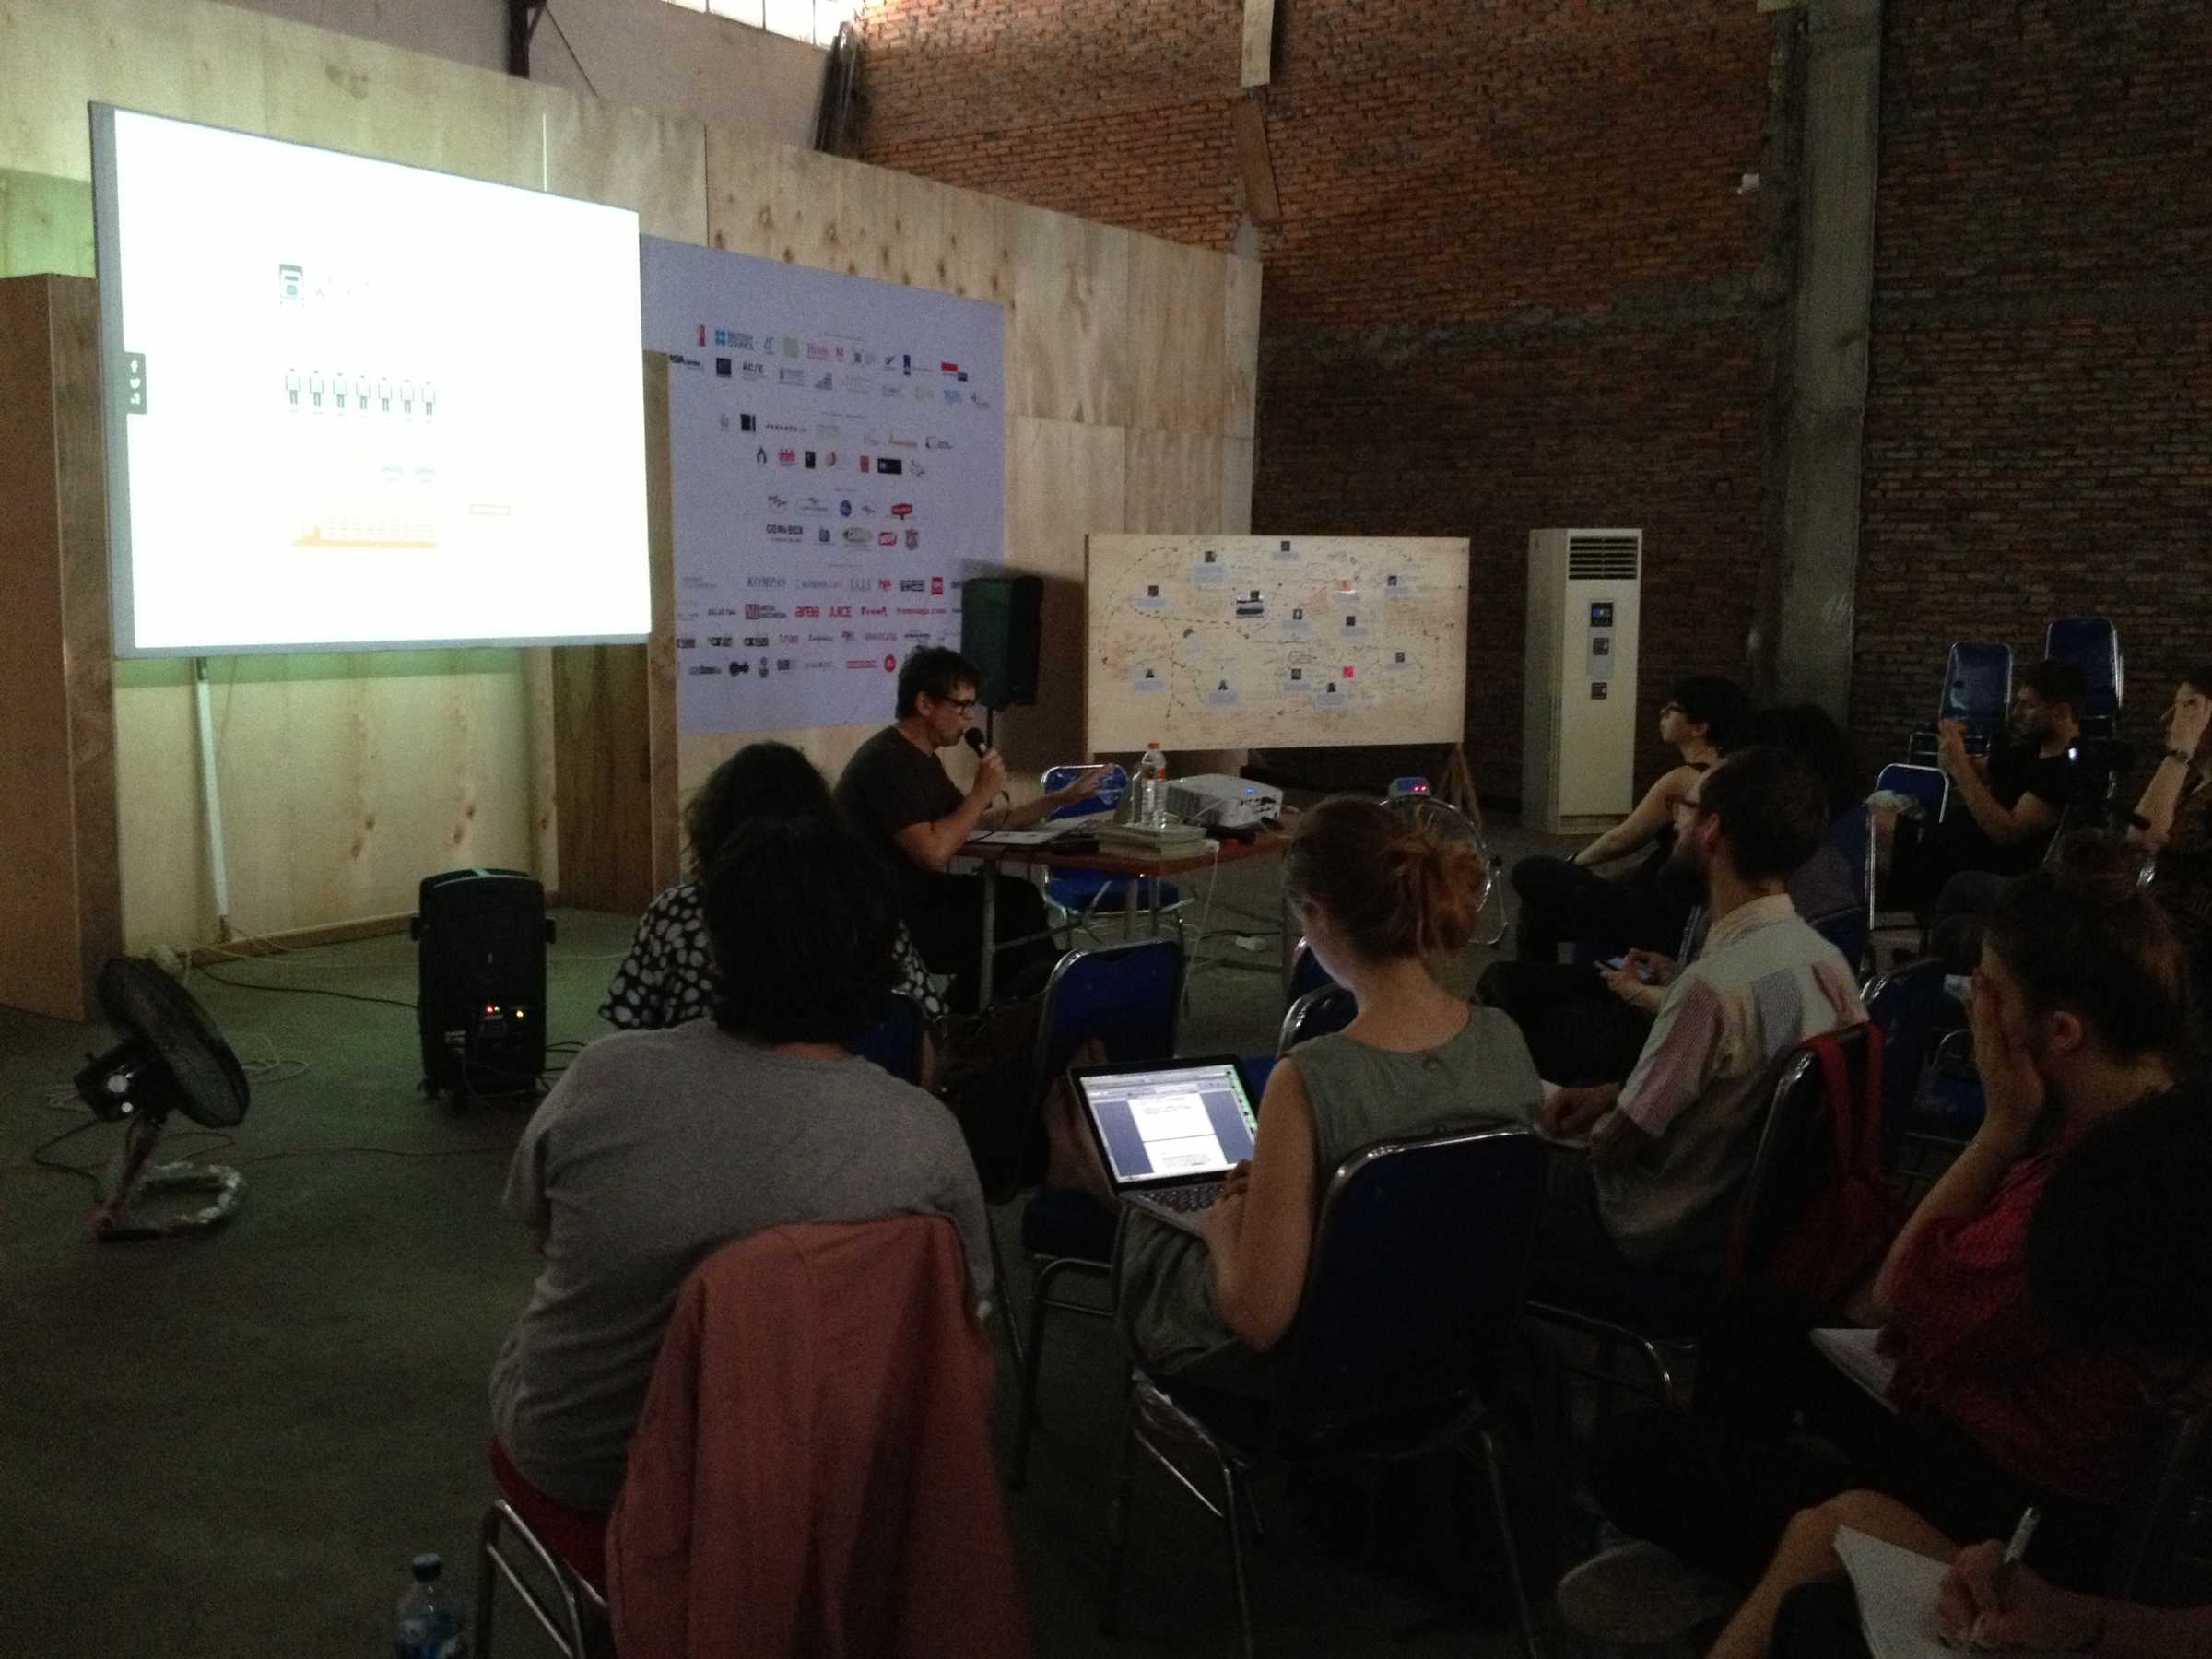 Brett Neilson lecturing at the Jakarta Biennale 2015 upon an invitation by DAI's theory tutors Rachel O'Reilly and Marina Vishmidt.